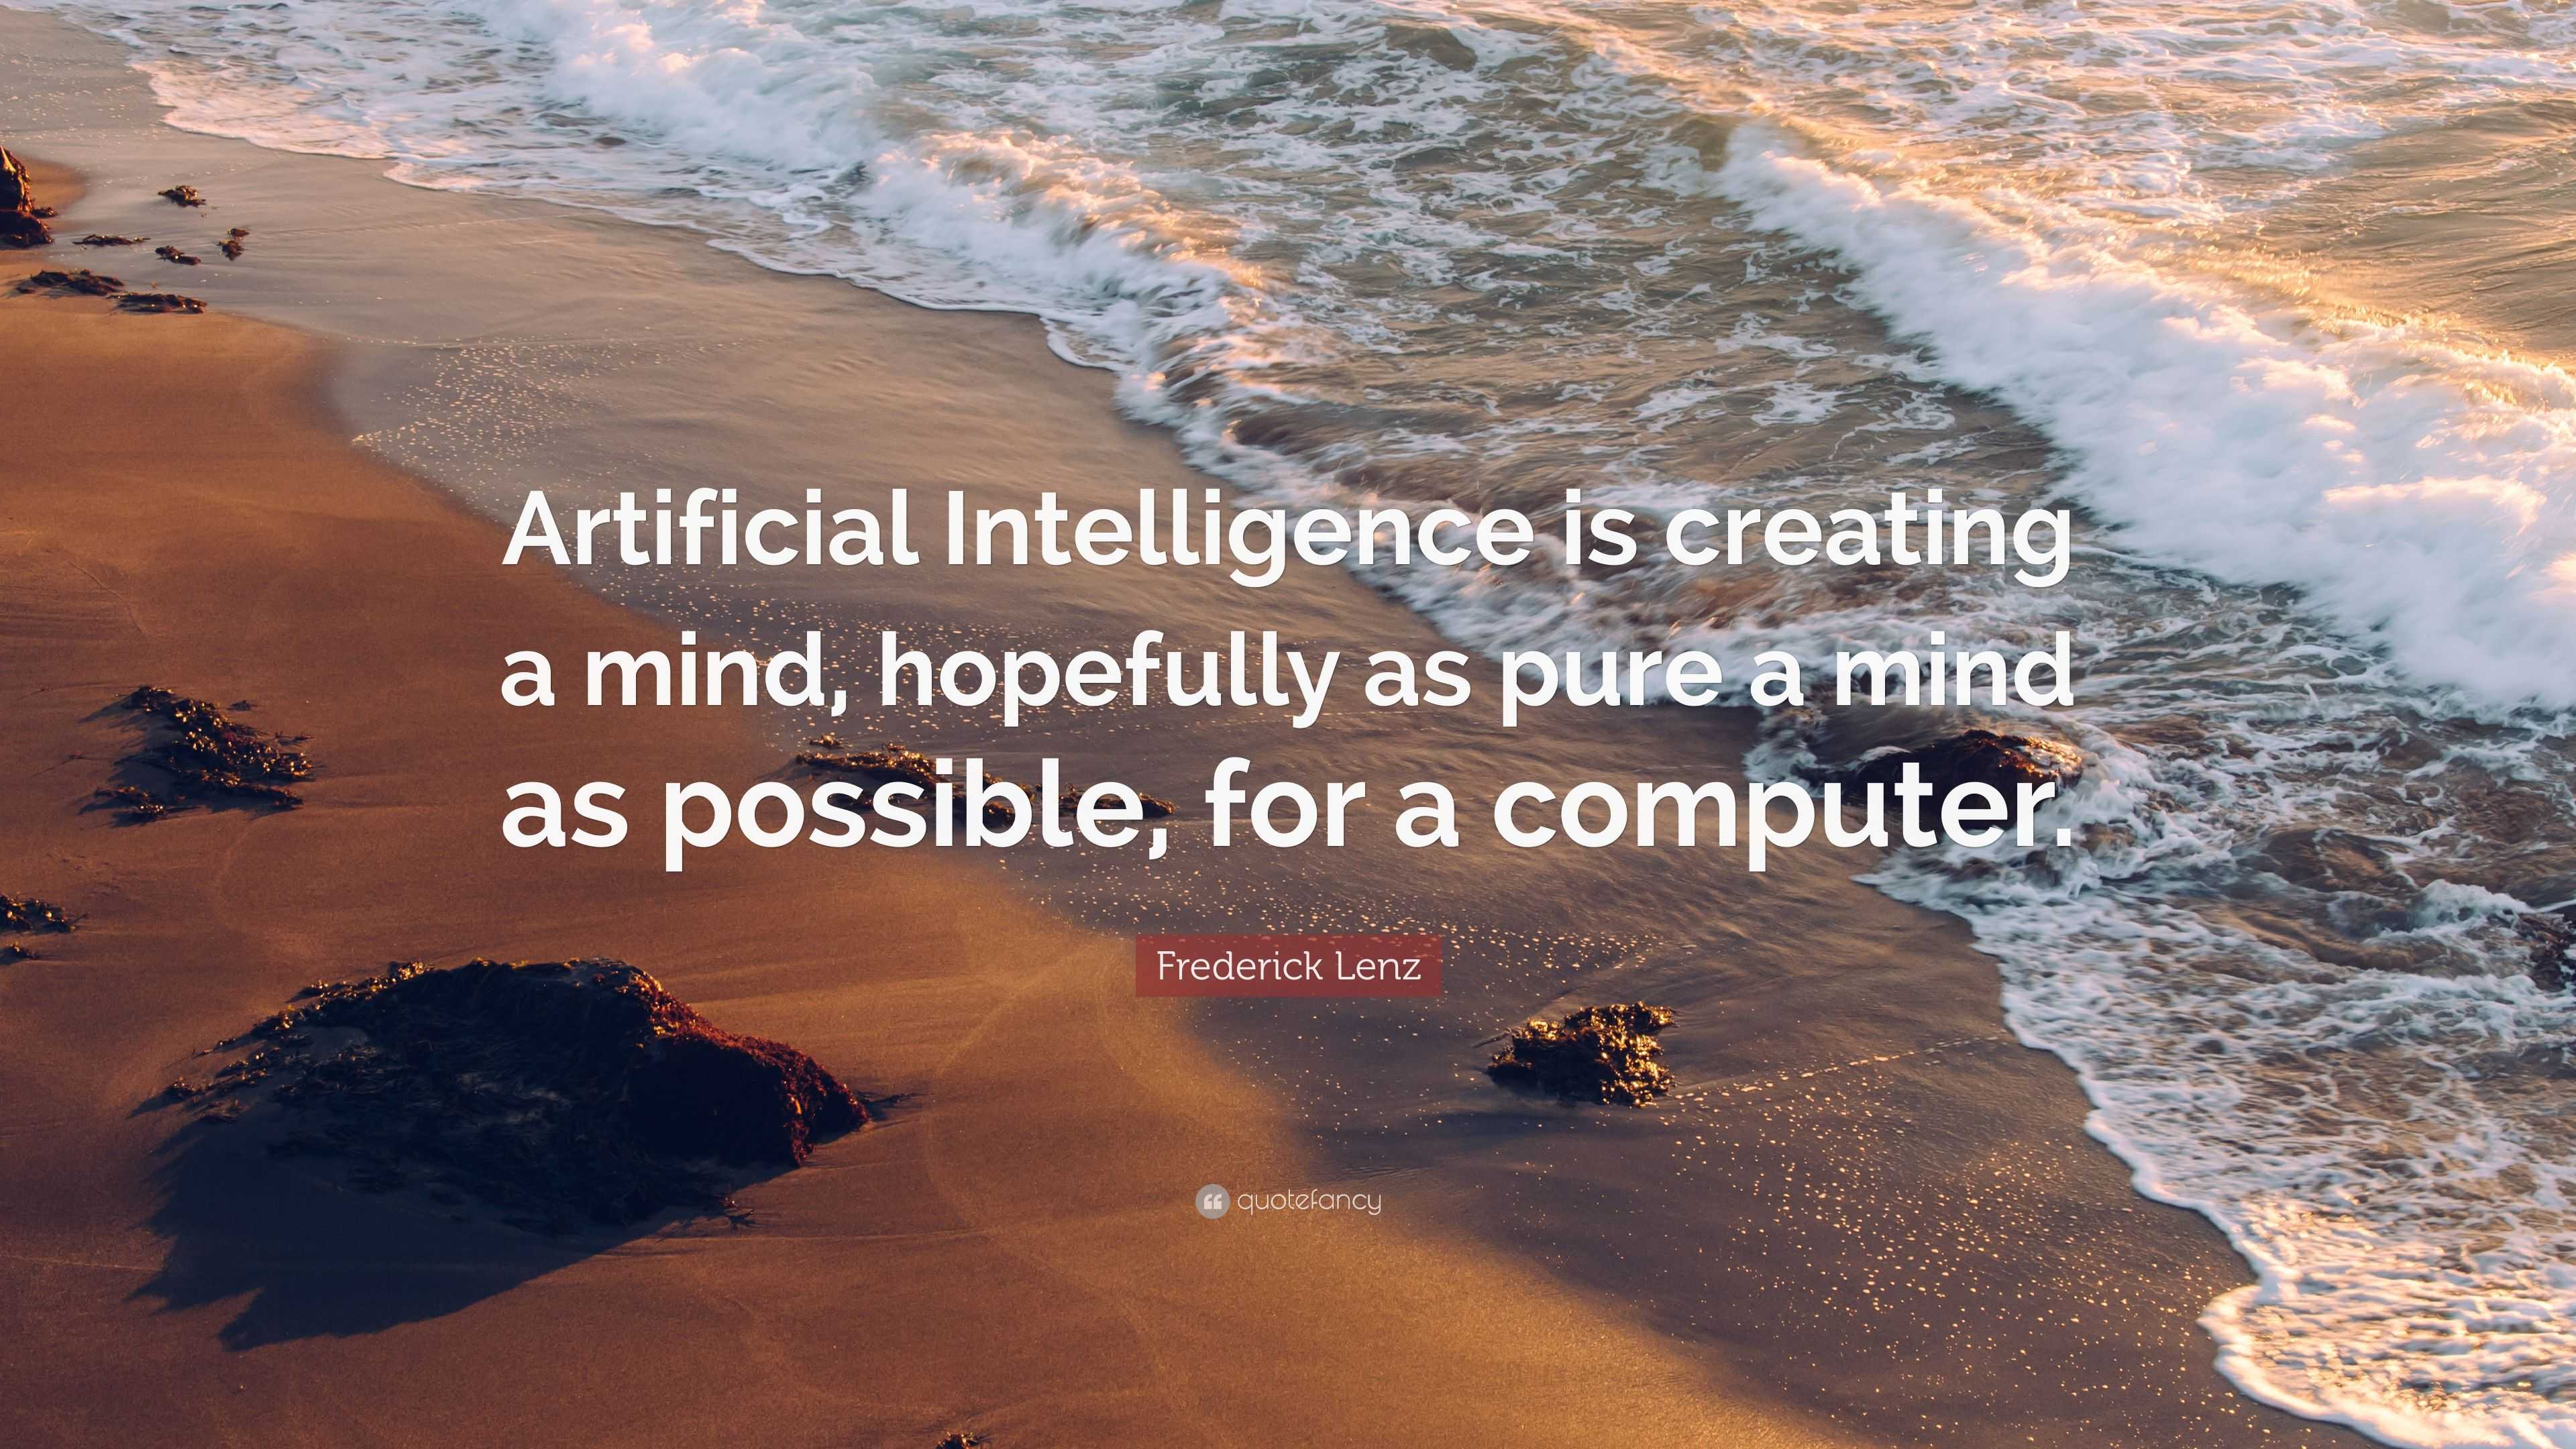 Frederick Lenz Quote: “Artificial Intelligence is creating a mind